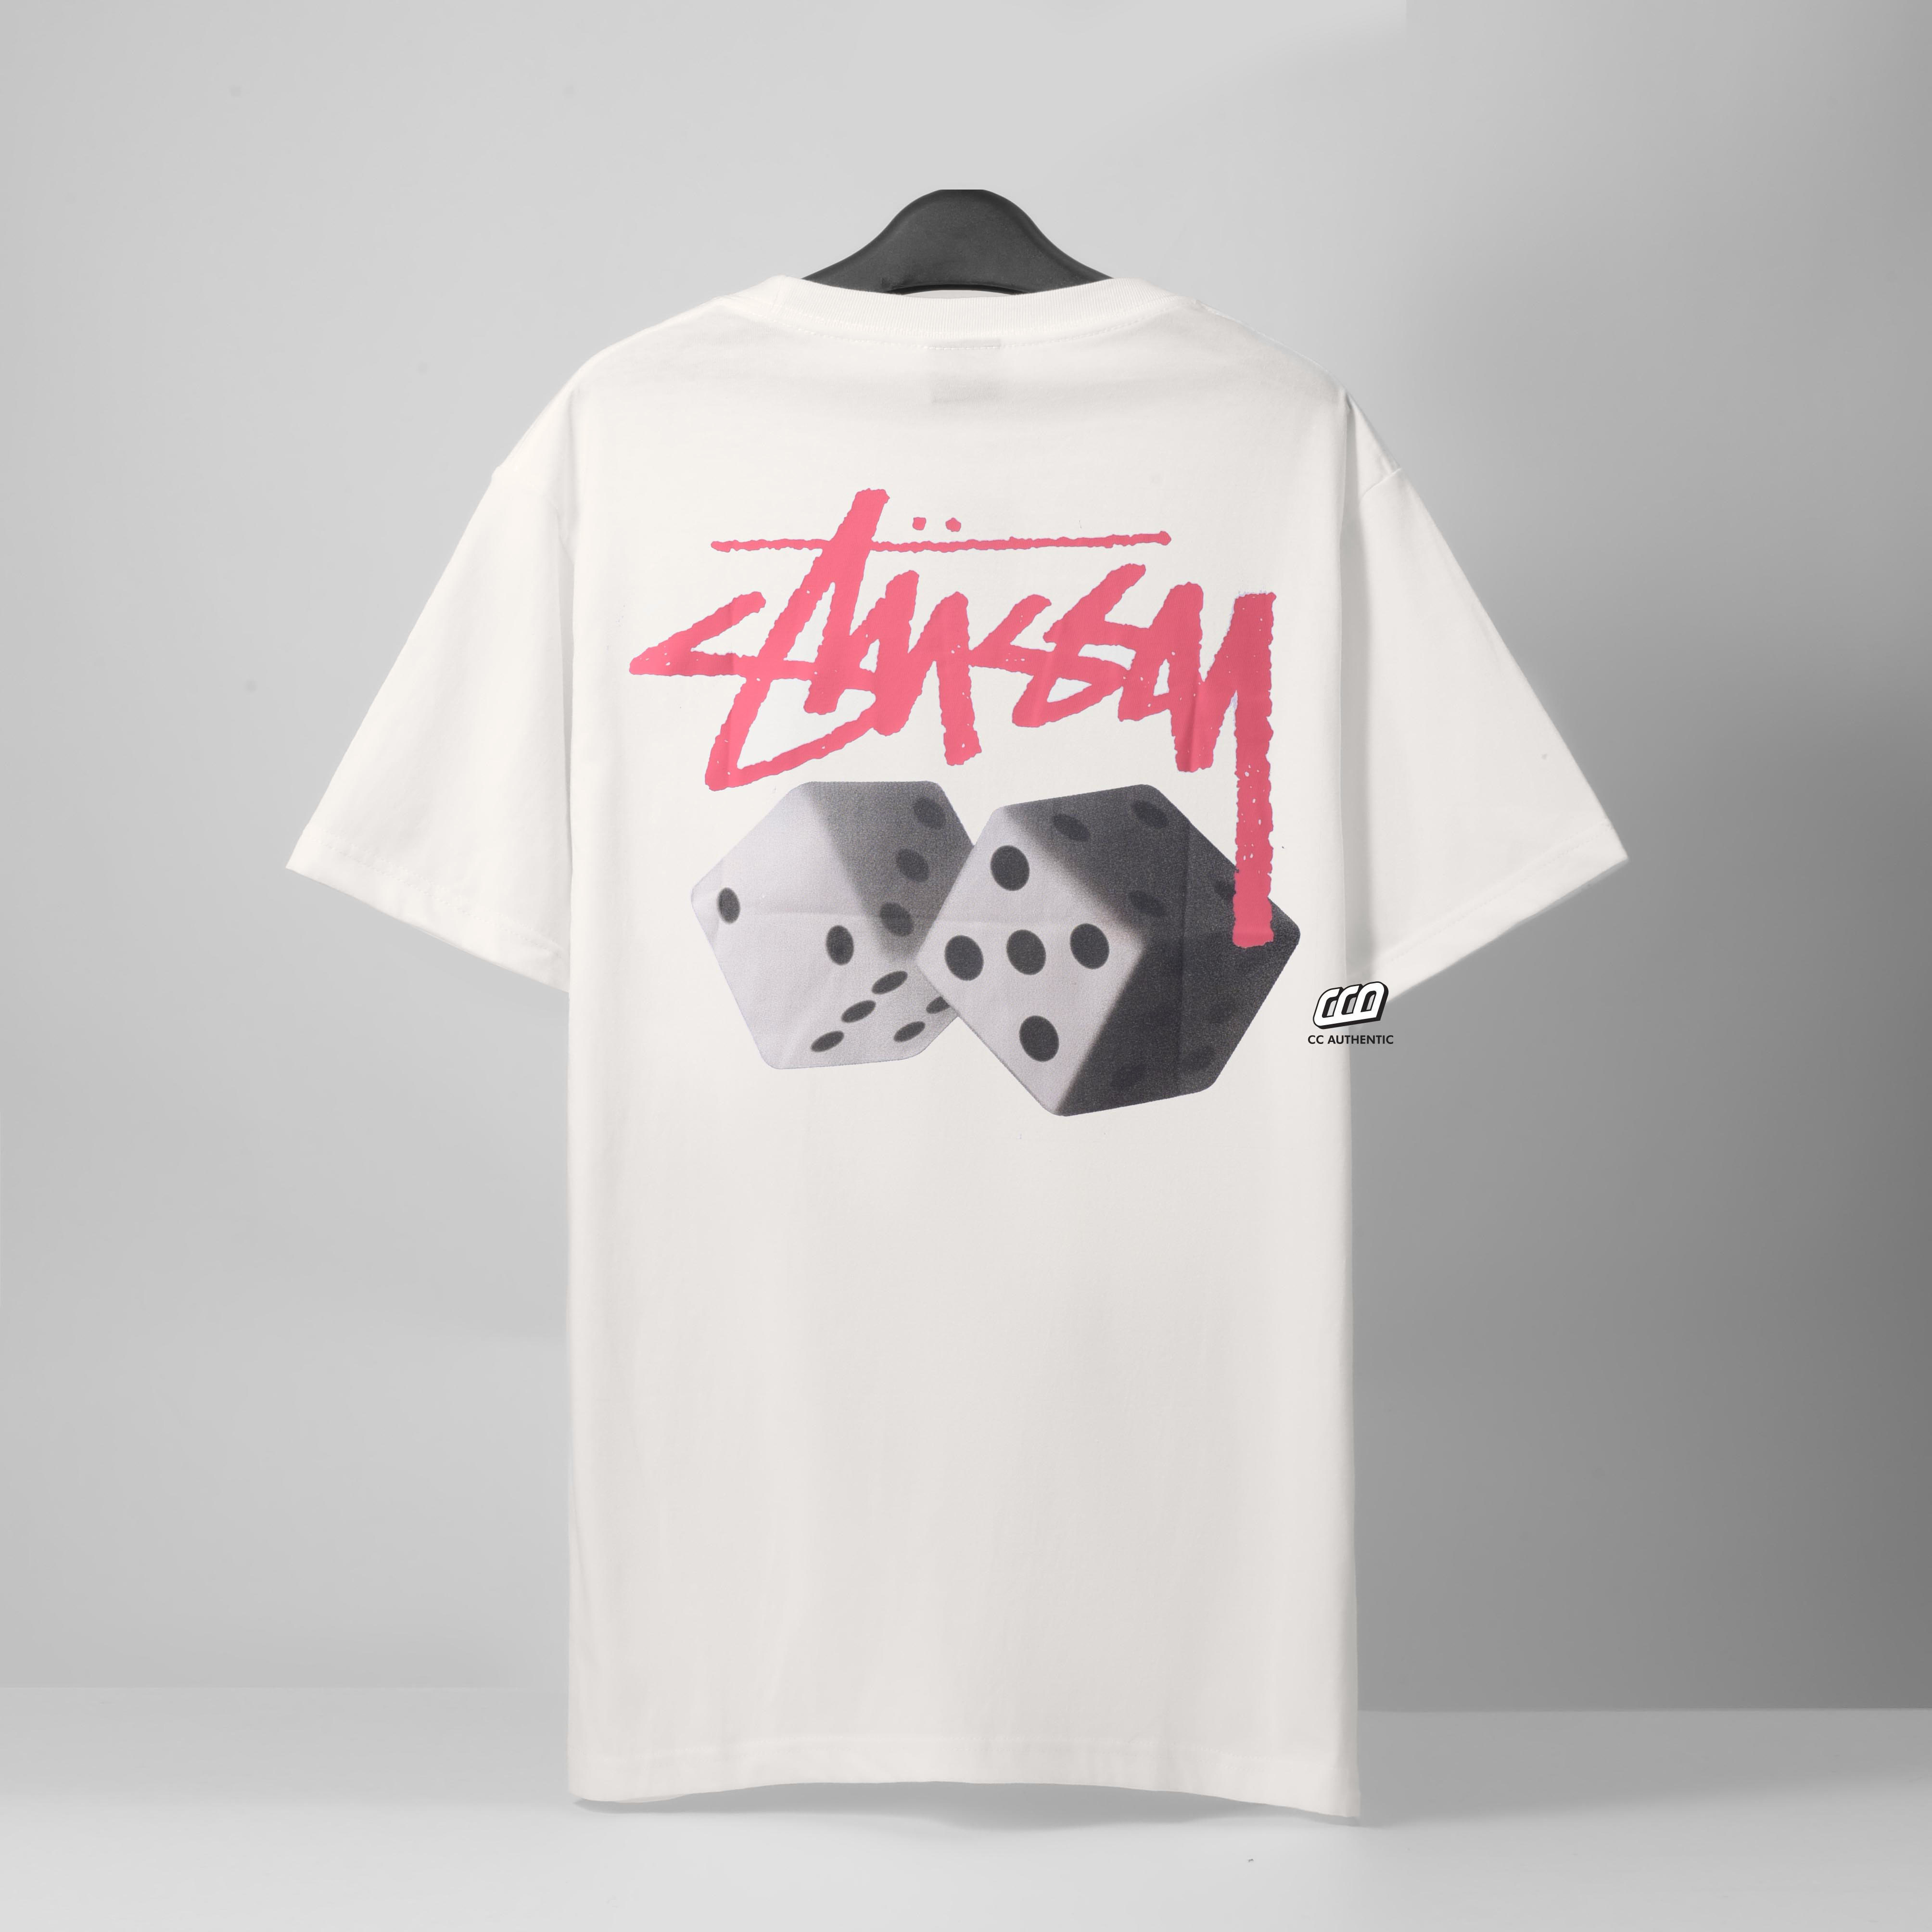 STUSSY ROLL THE DICE DYED T-SHIRT - WHITE